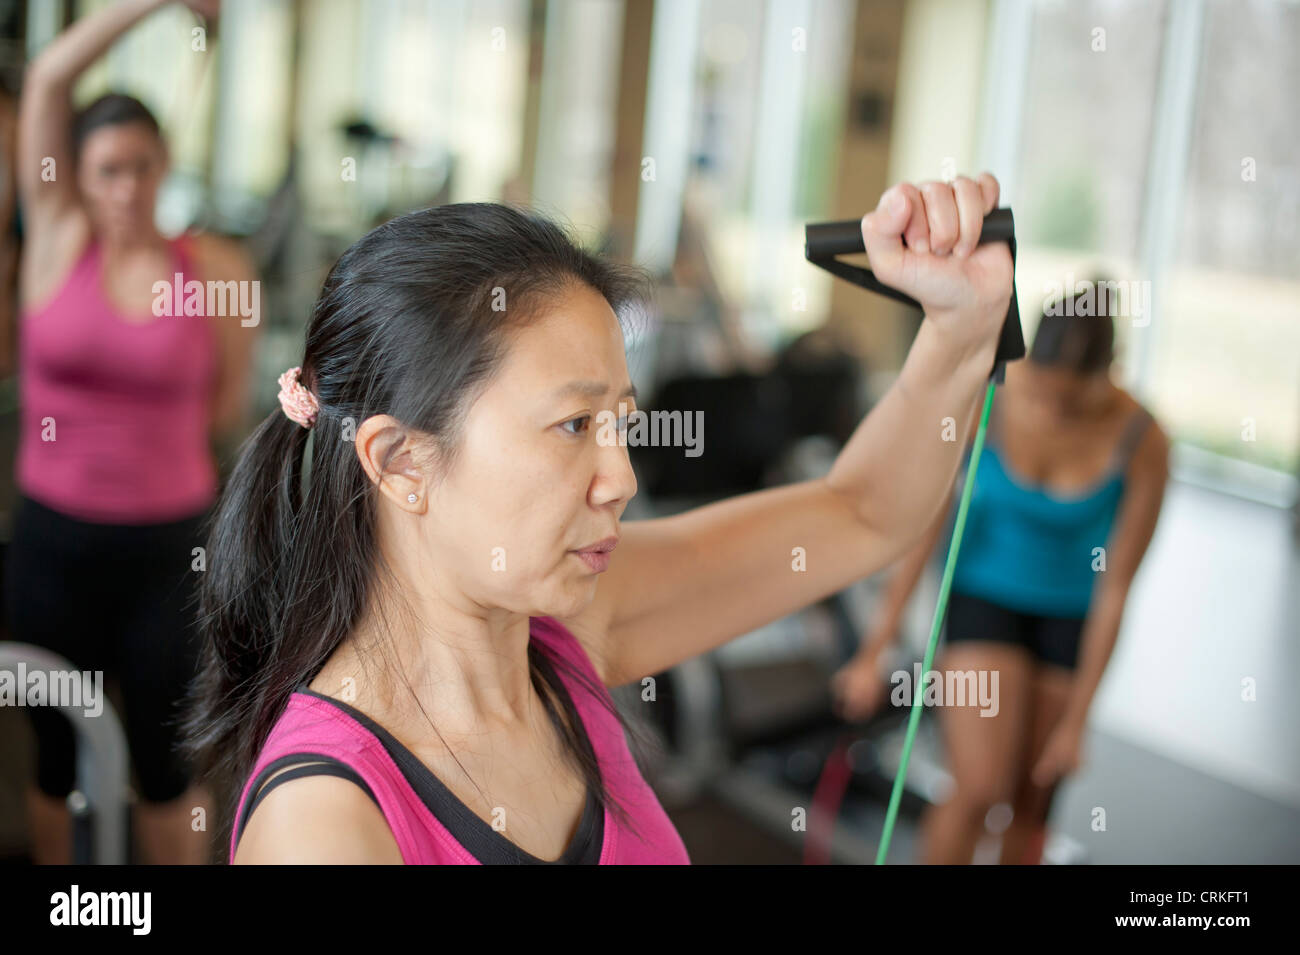 Donna stretching in palestra Foto Stock